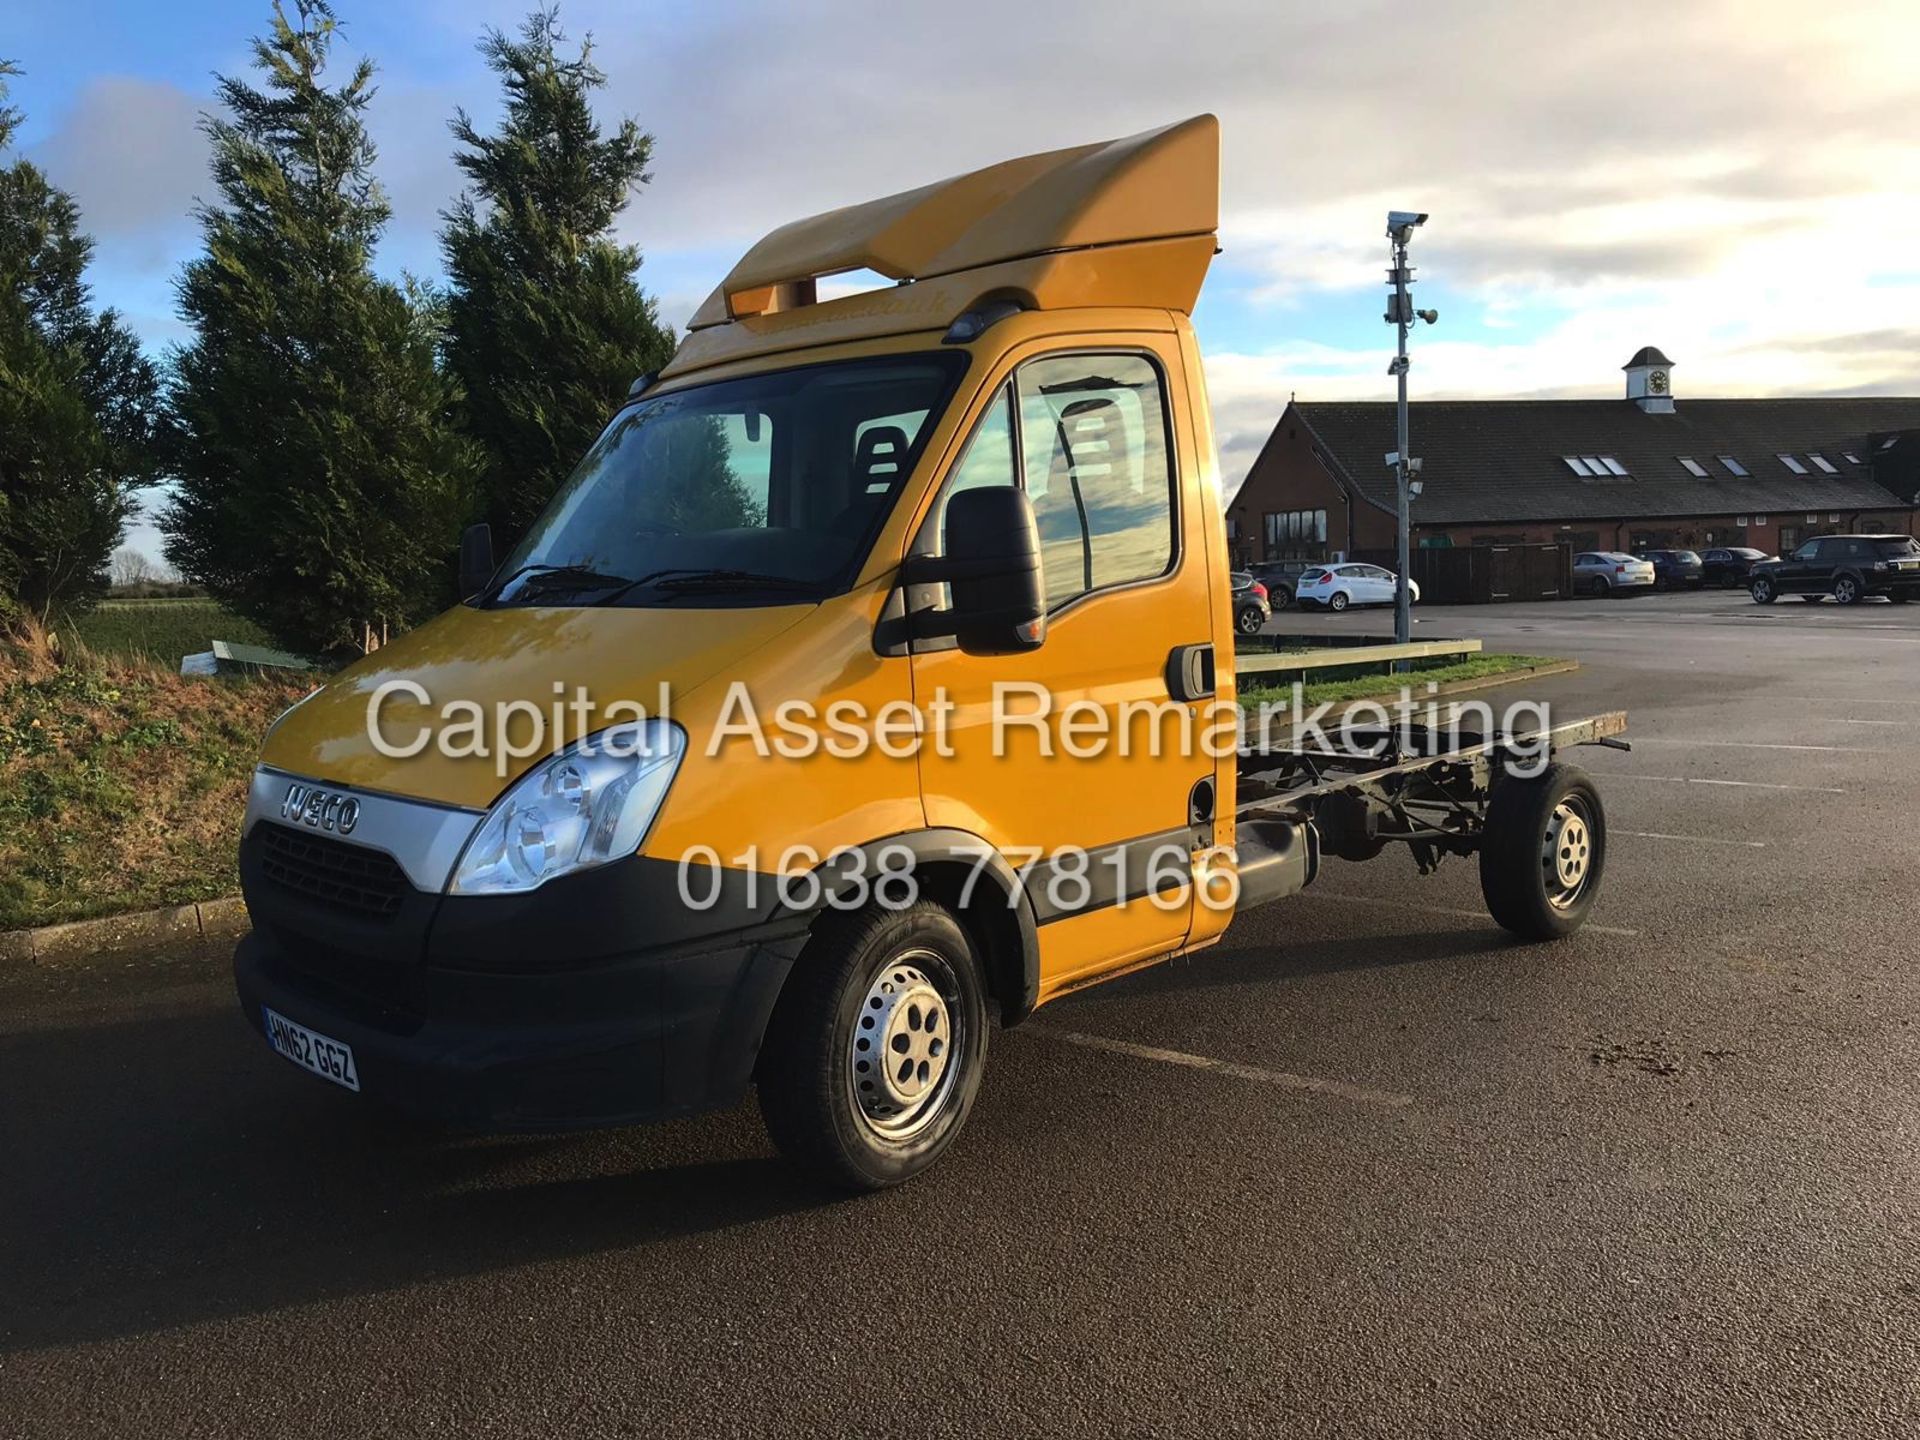 (ON SALE) IVECO DAILY 35S13 - CHASSIS CAB - NEW SHAPE - 2013 MODEL - LONG MOT - IDEAL RECOVERY TRUCK